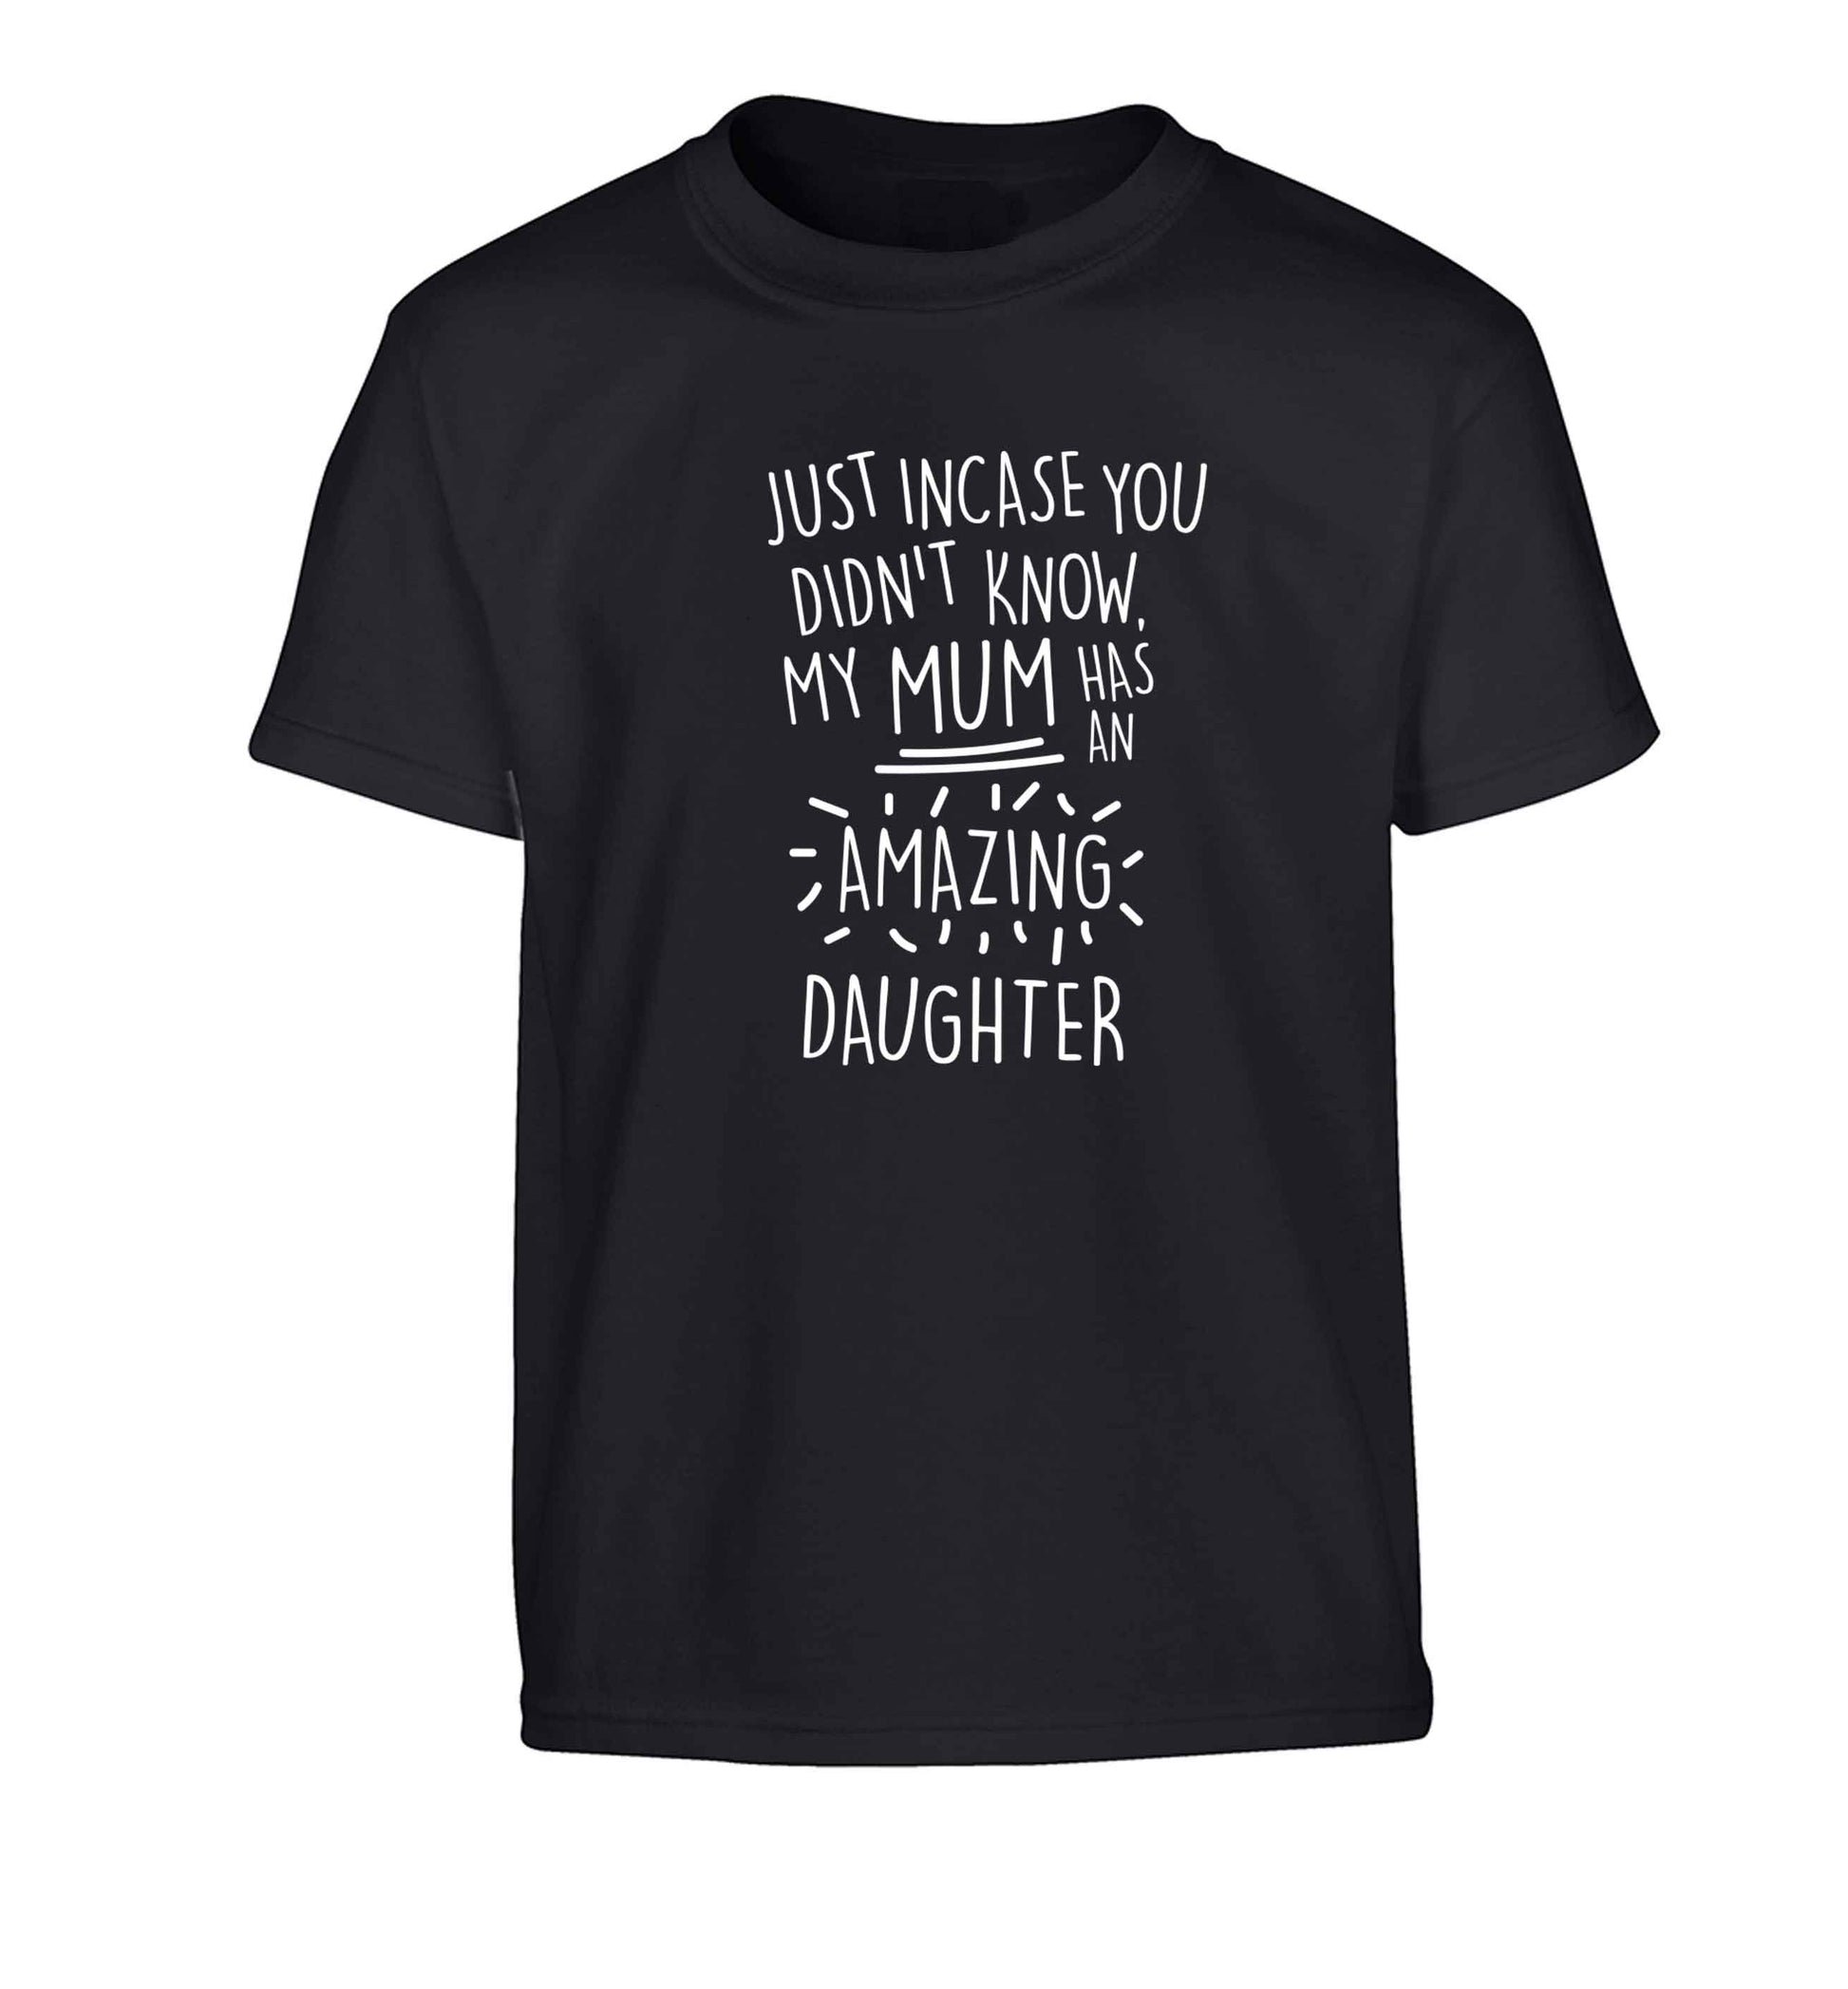 Just incase you didn't know my mum has an amazing daughter Children's black Tshirt 12-13 Years